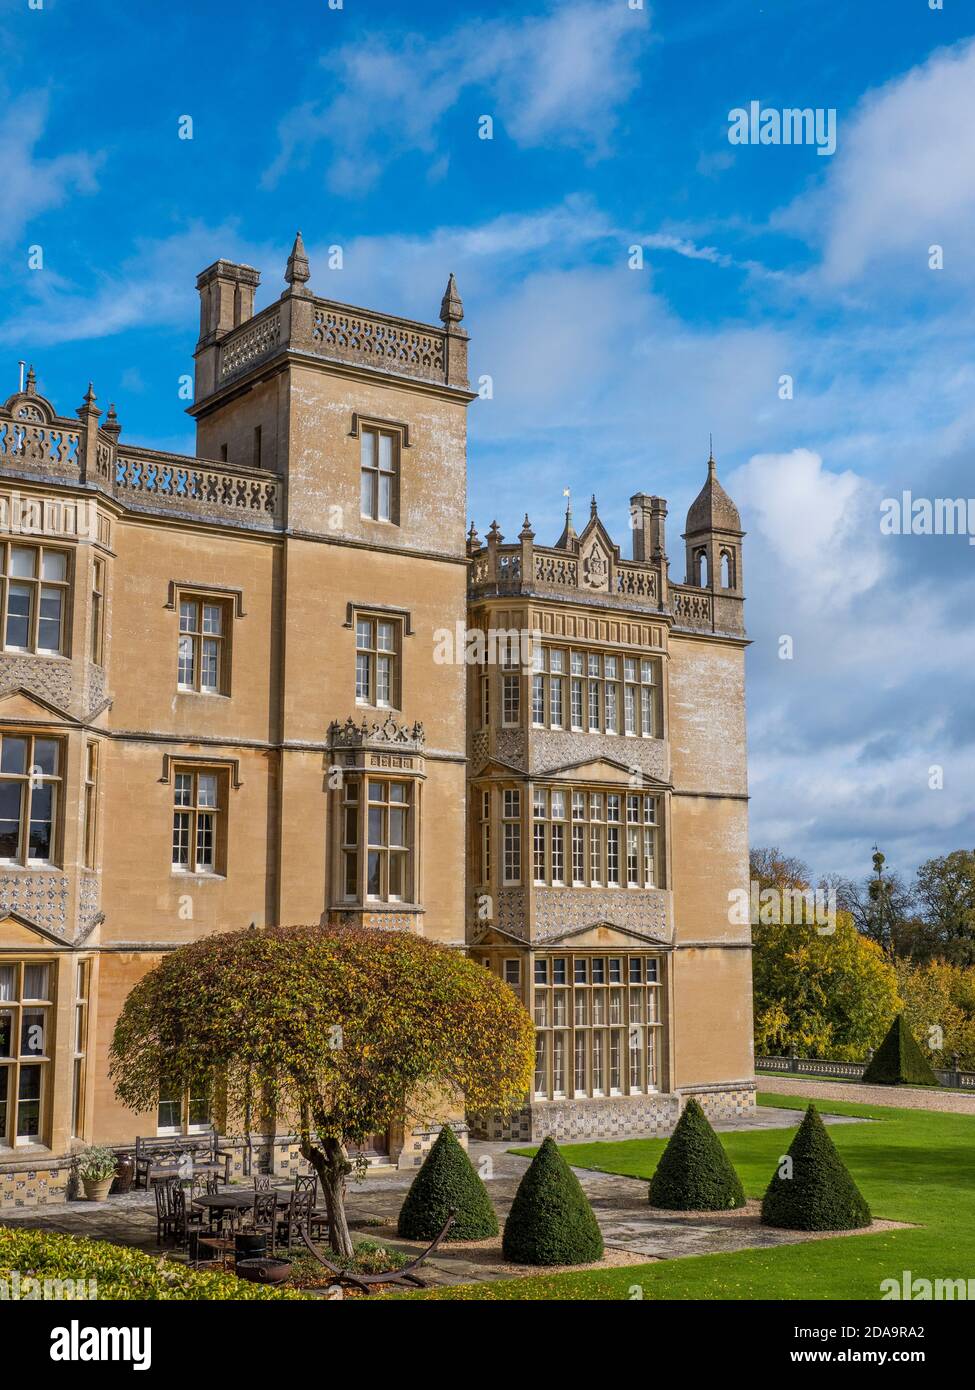 High View of Englefield House and gardens, Englefield, Thale, Reading, Berkshire, England, UK, GB. Stock Photo